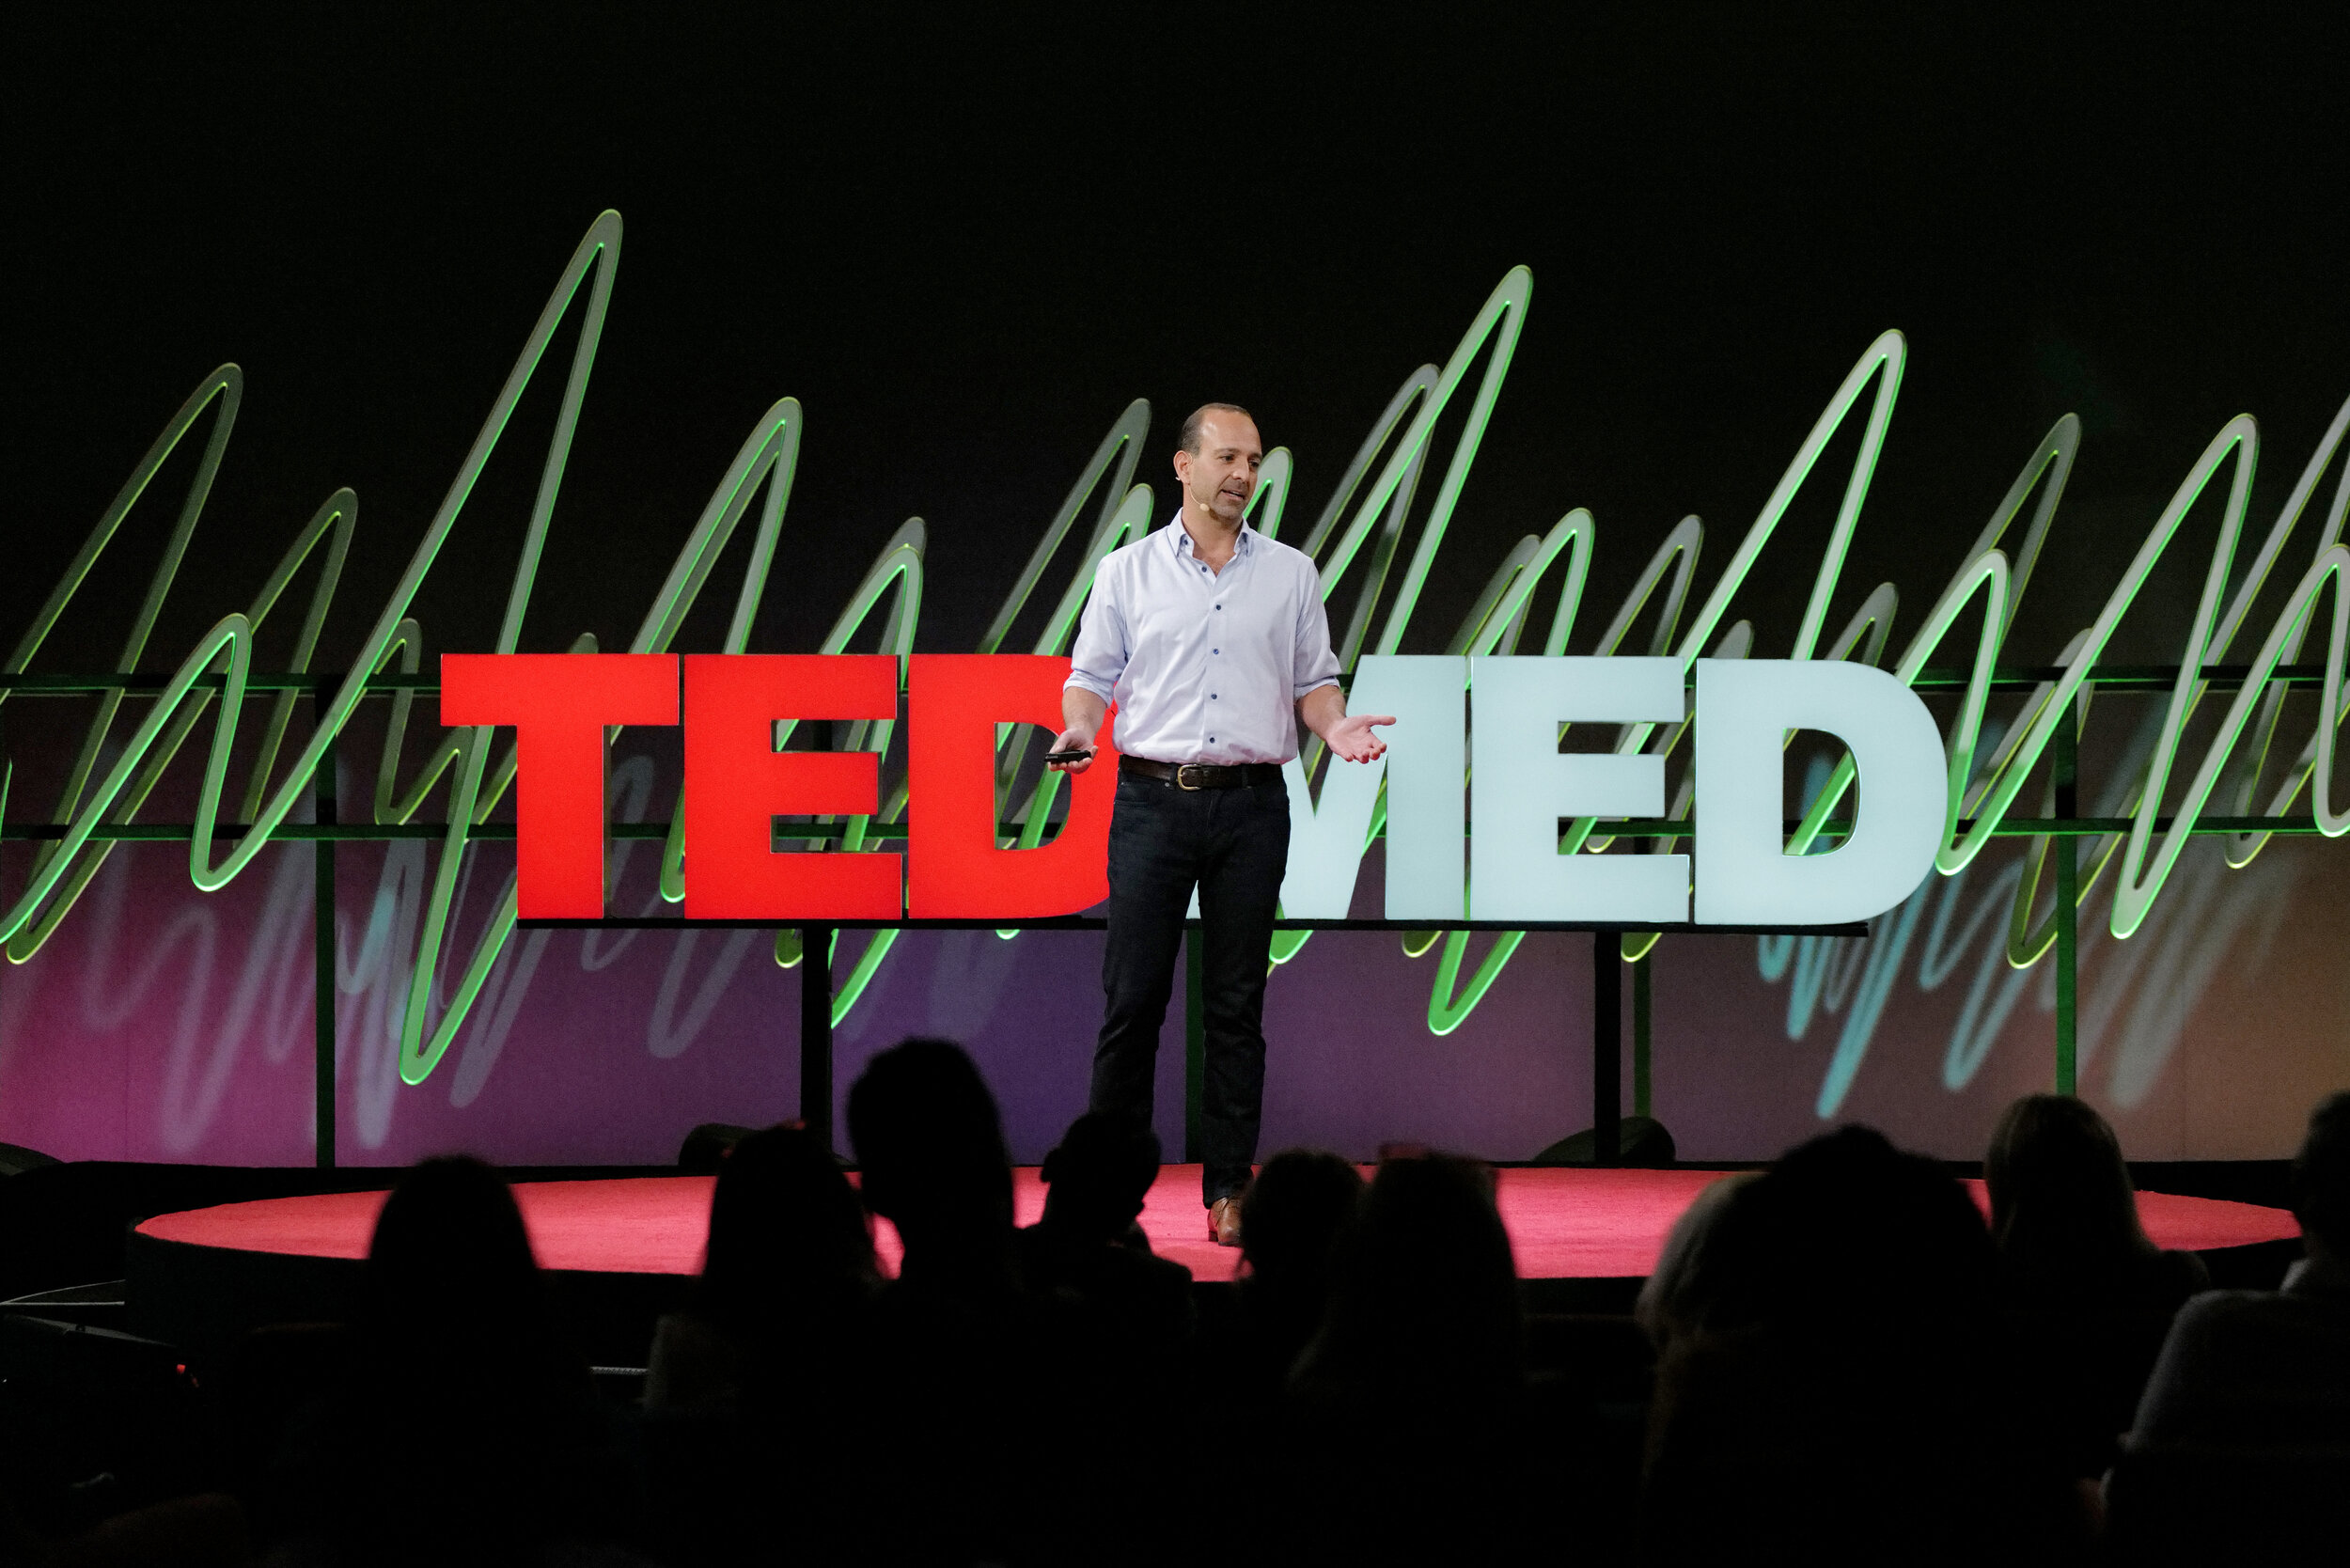  Leor gives a TEDMED talk about HIV TIP technology in Boston, March 2020. 